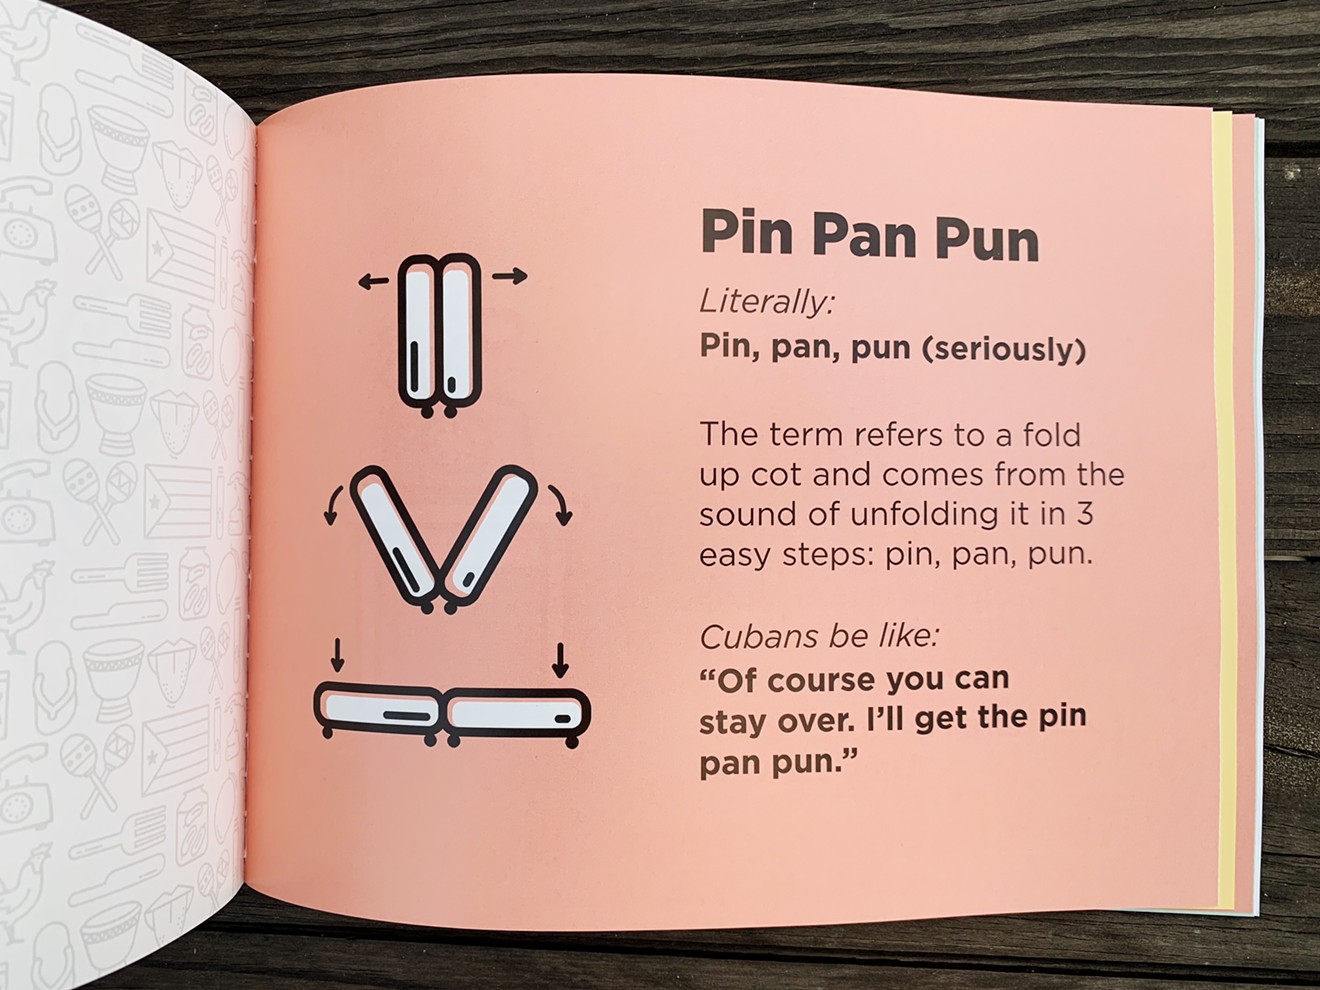 Going for a sleepover? Don't forget the pin pan pun.